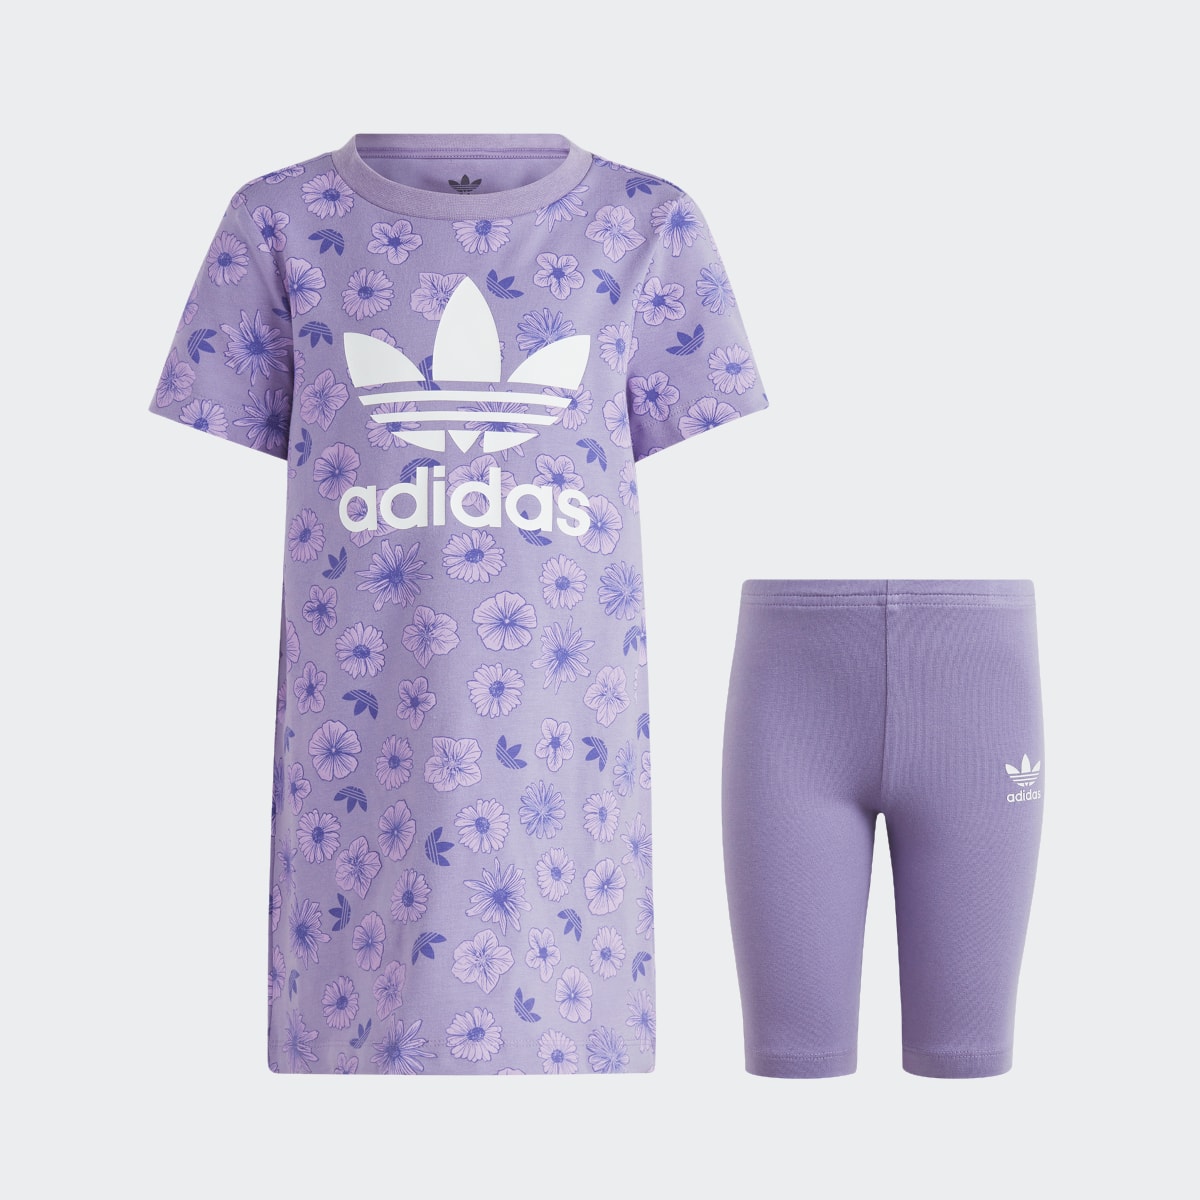 Adidas Completo Floral Dress. 4